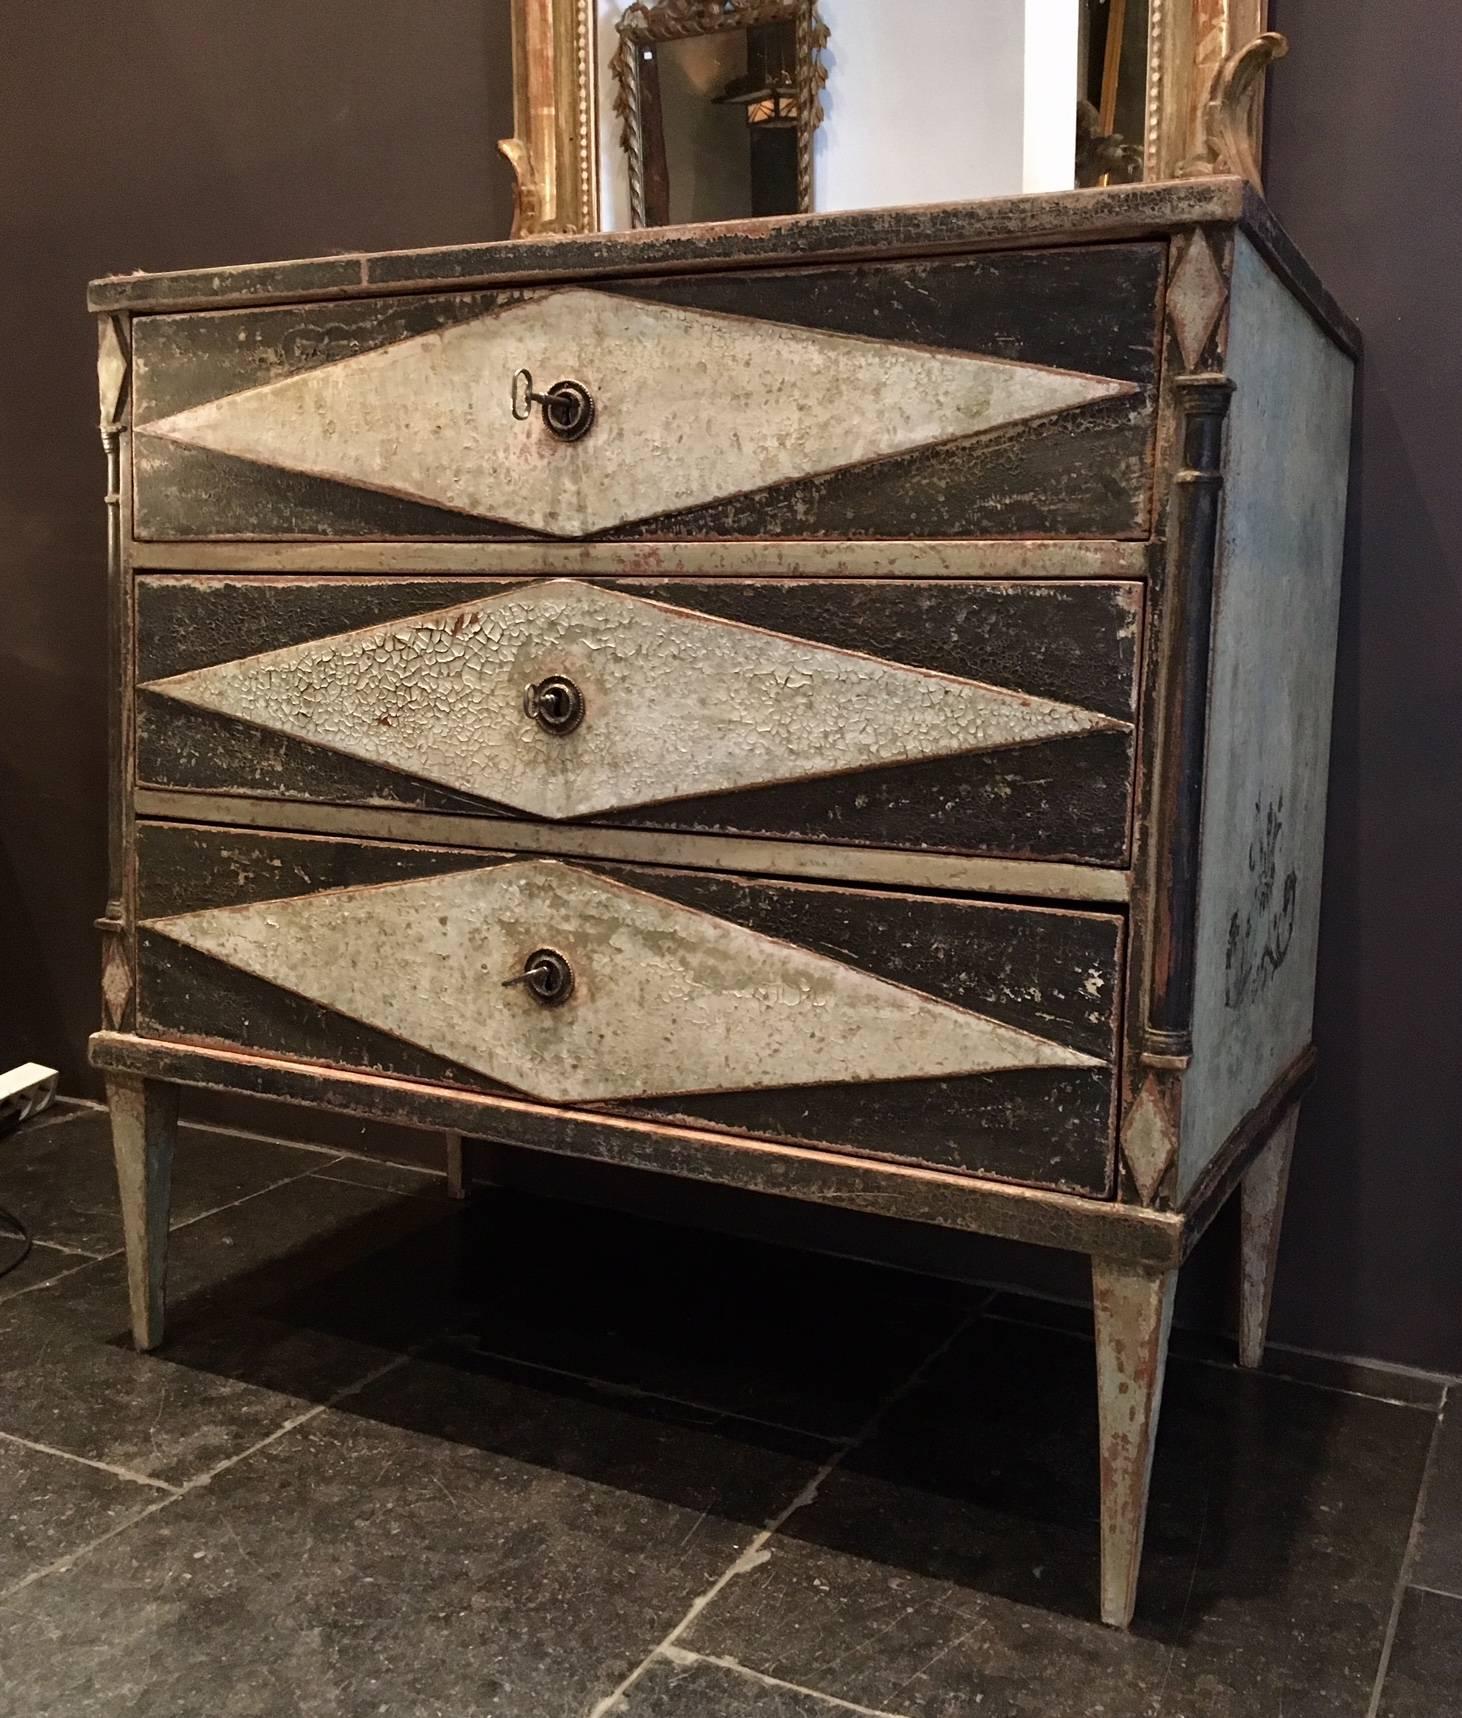 Charming antique commode with a beautiful patine and craquelure. The cabinet has three drawers, complete with locks and keys. 
The commode was painted in a light mint green and dark gray color. The paint shows beautiful deep crackles, which creates